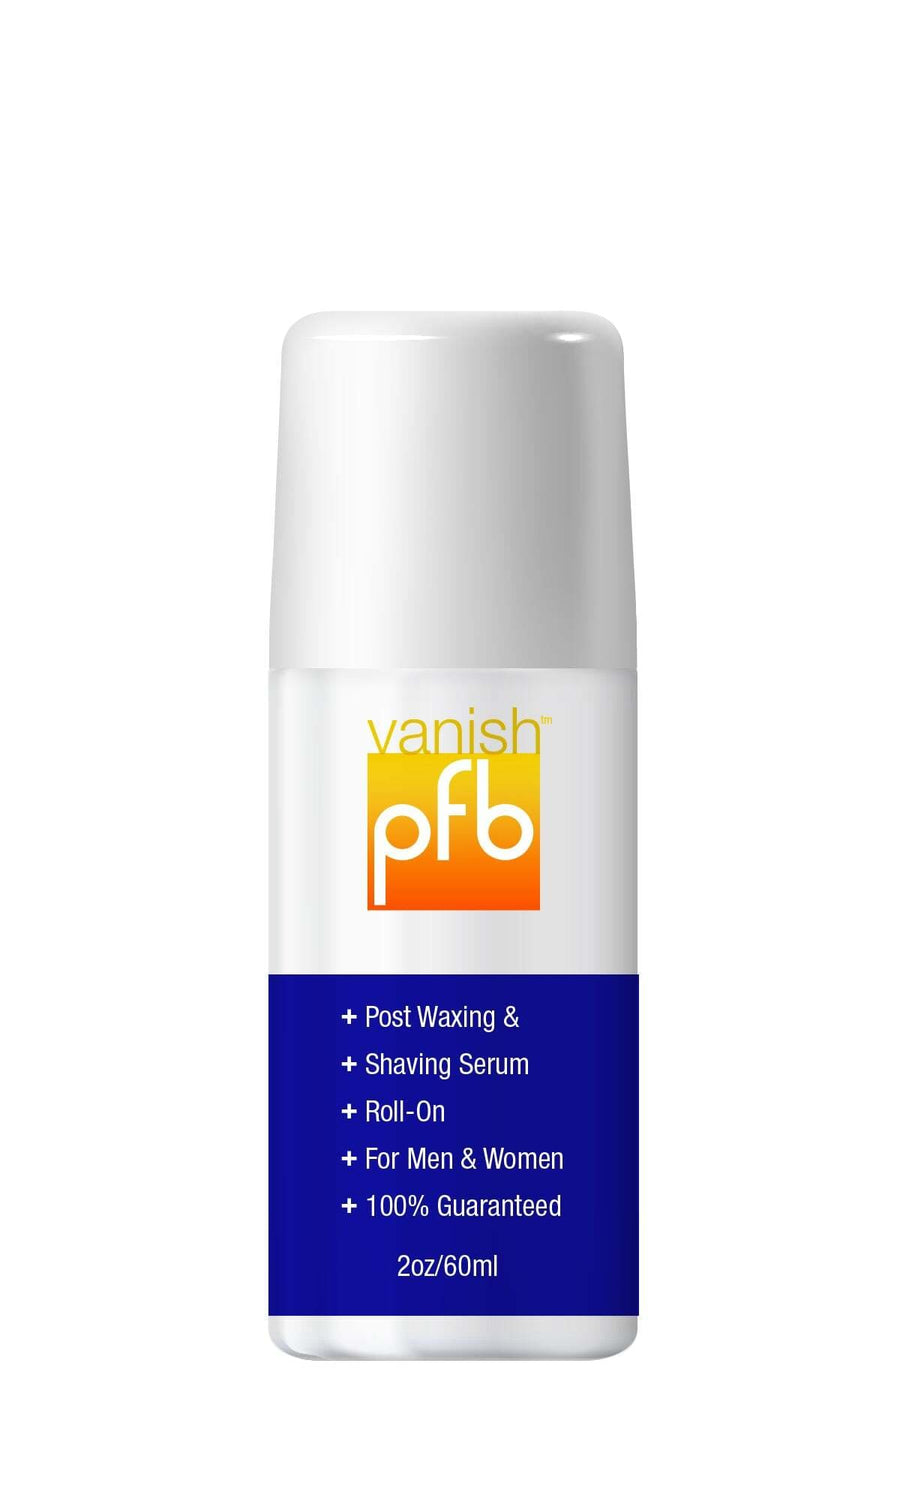 PFB Vanish Regular 93g. 4 ounce size treatment for ingrown hairs shop at Skin Type Solutions club